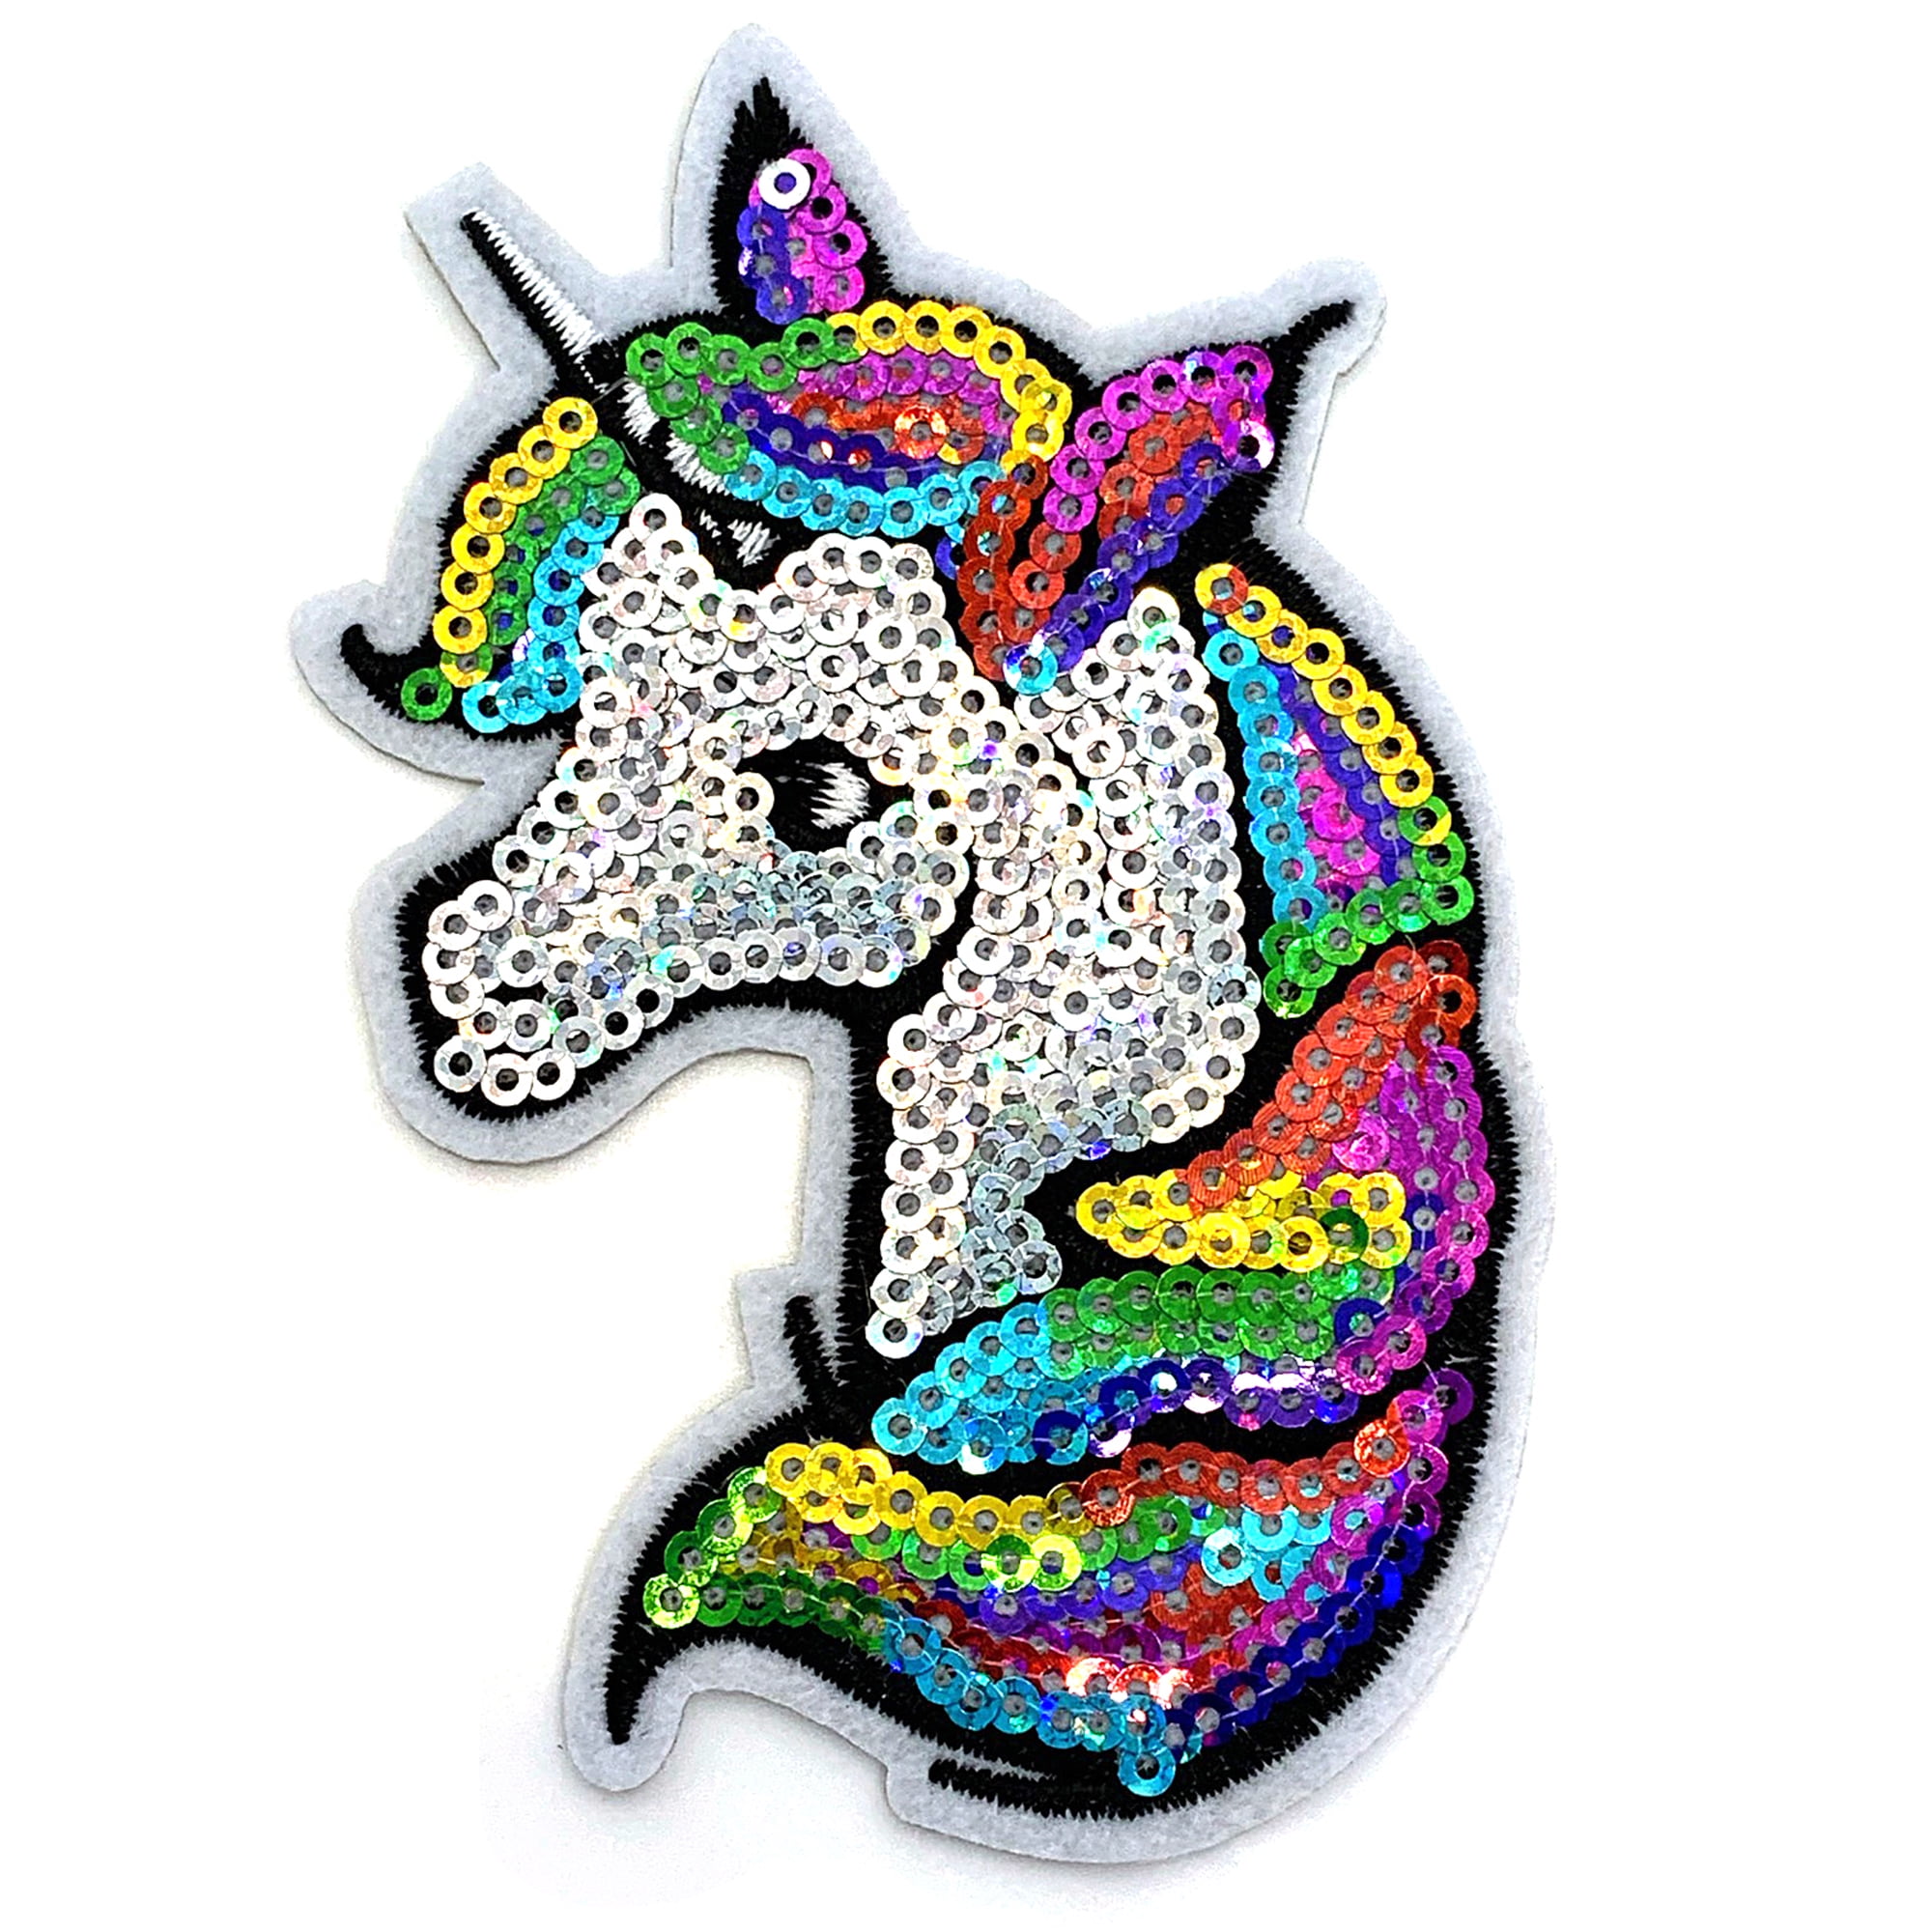 Gwen Studios Rainbow Sequin Unicorn Embroidered Iron-on Patch Applique,  Rainbow Colors